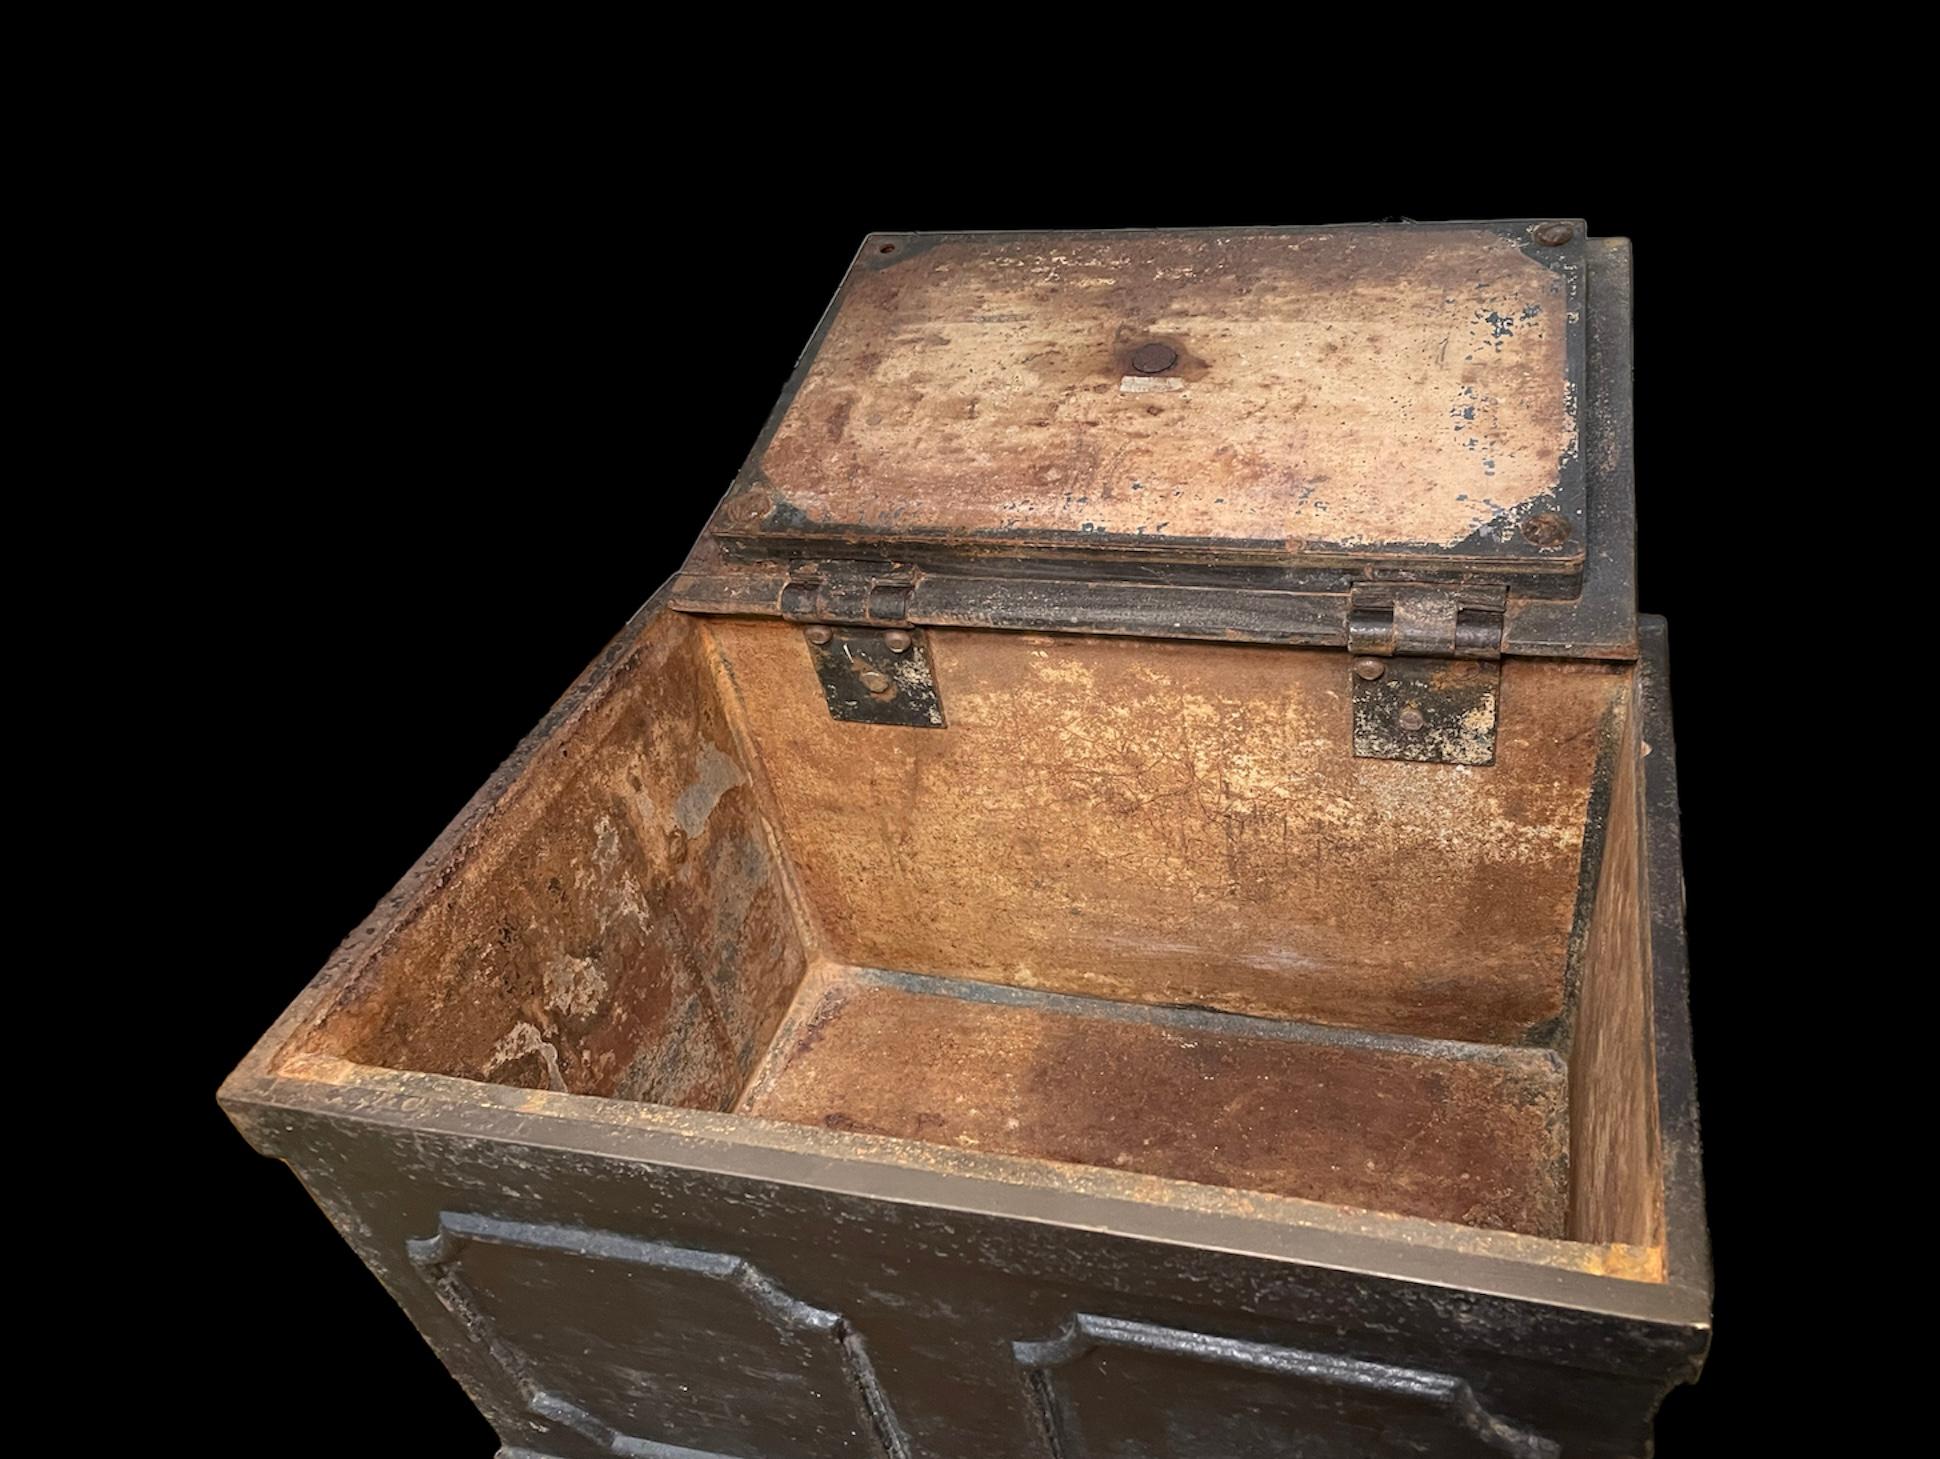 This is a heavy iron storage/safe box. The rectangular metal box is adorned with octagonal shaped repousse molding around its sides. The upper side is a hinged lid that has a metal doorknob to pull it up. There is an escutcheon beside the doorknob